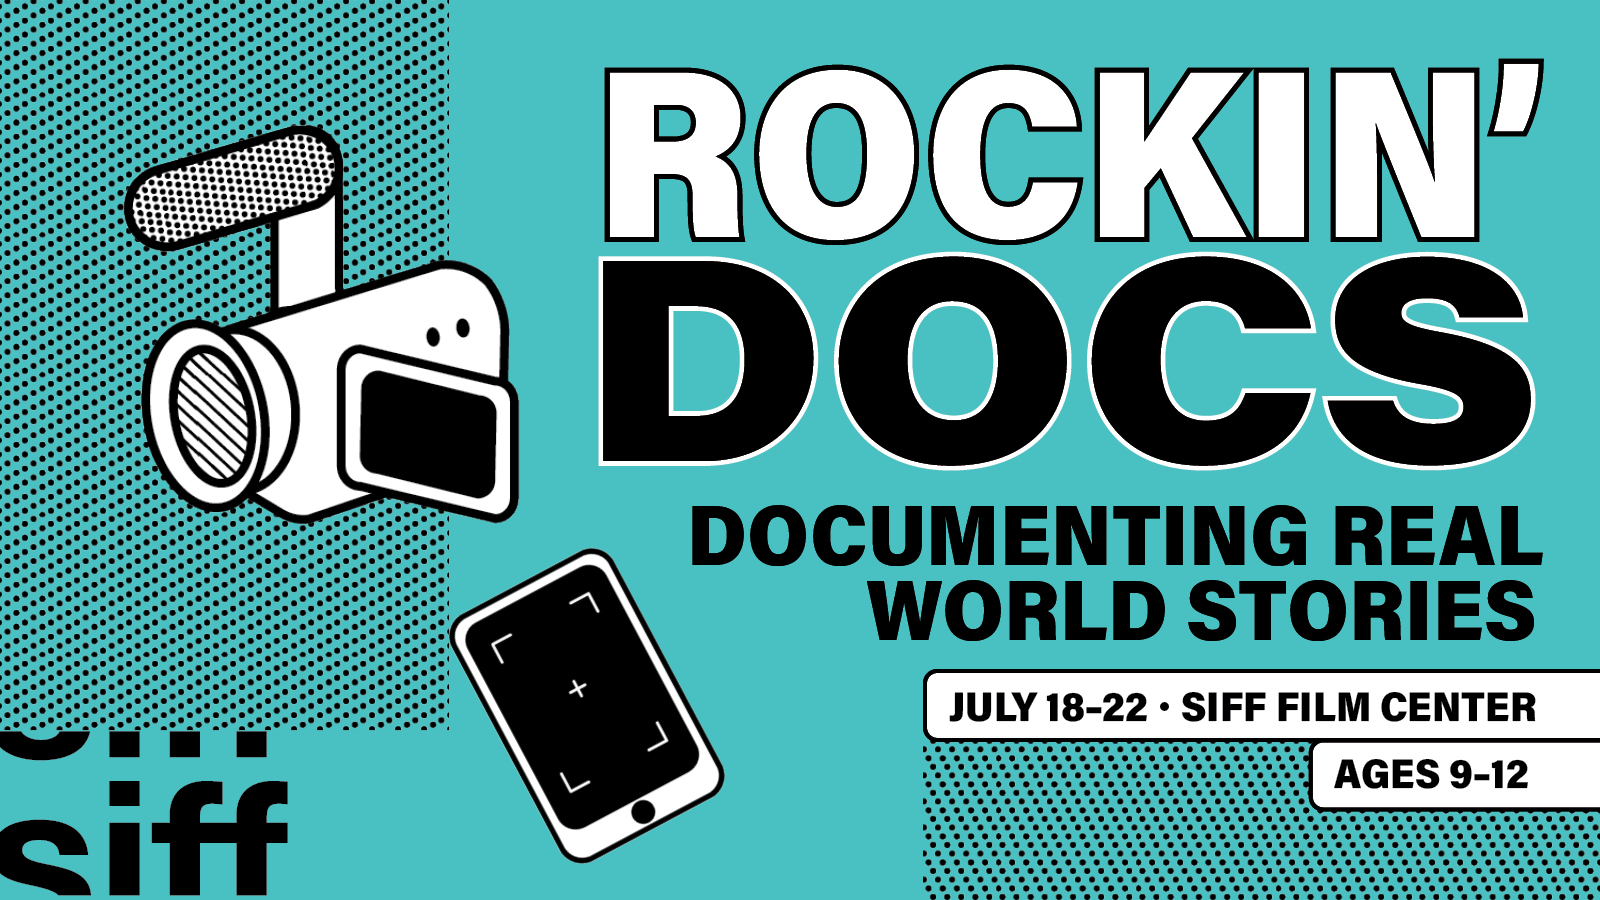 Rocking Docs: Documenting Real World Stories